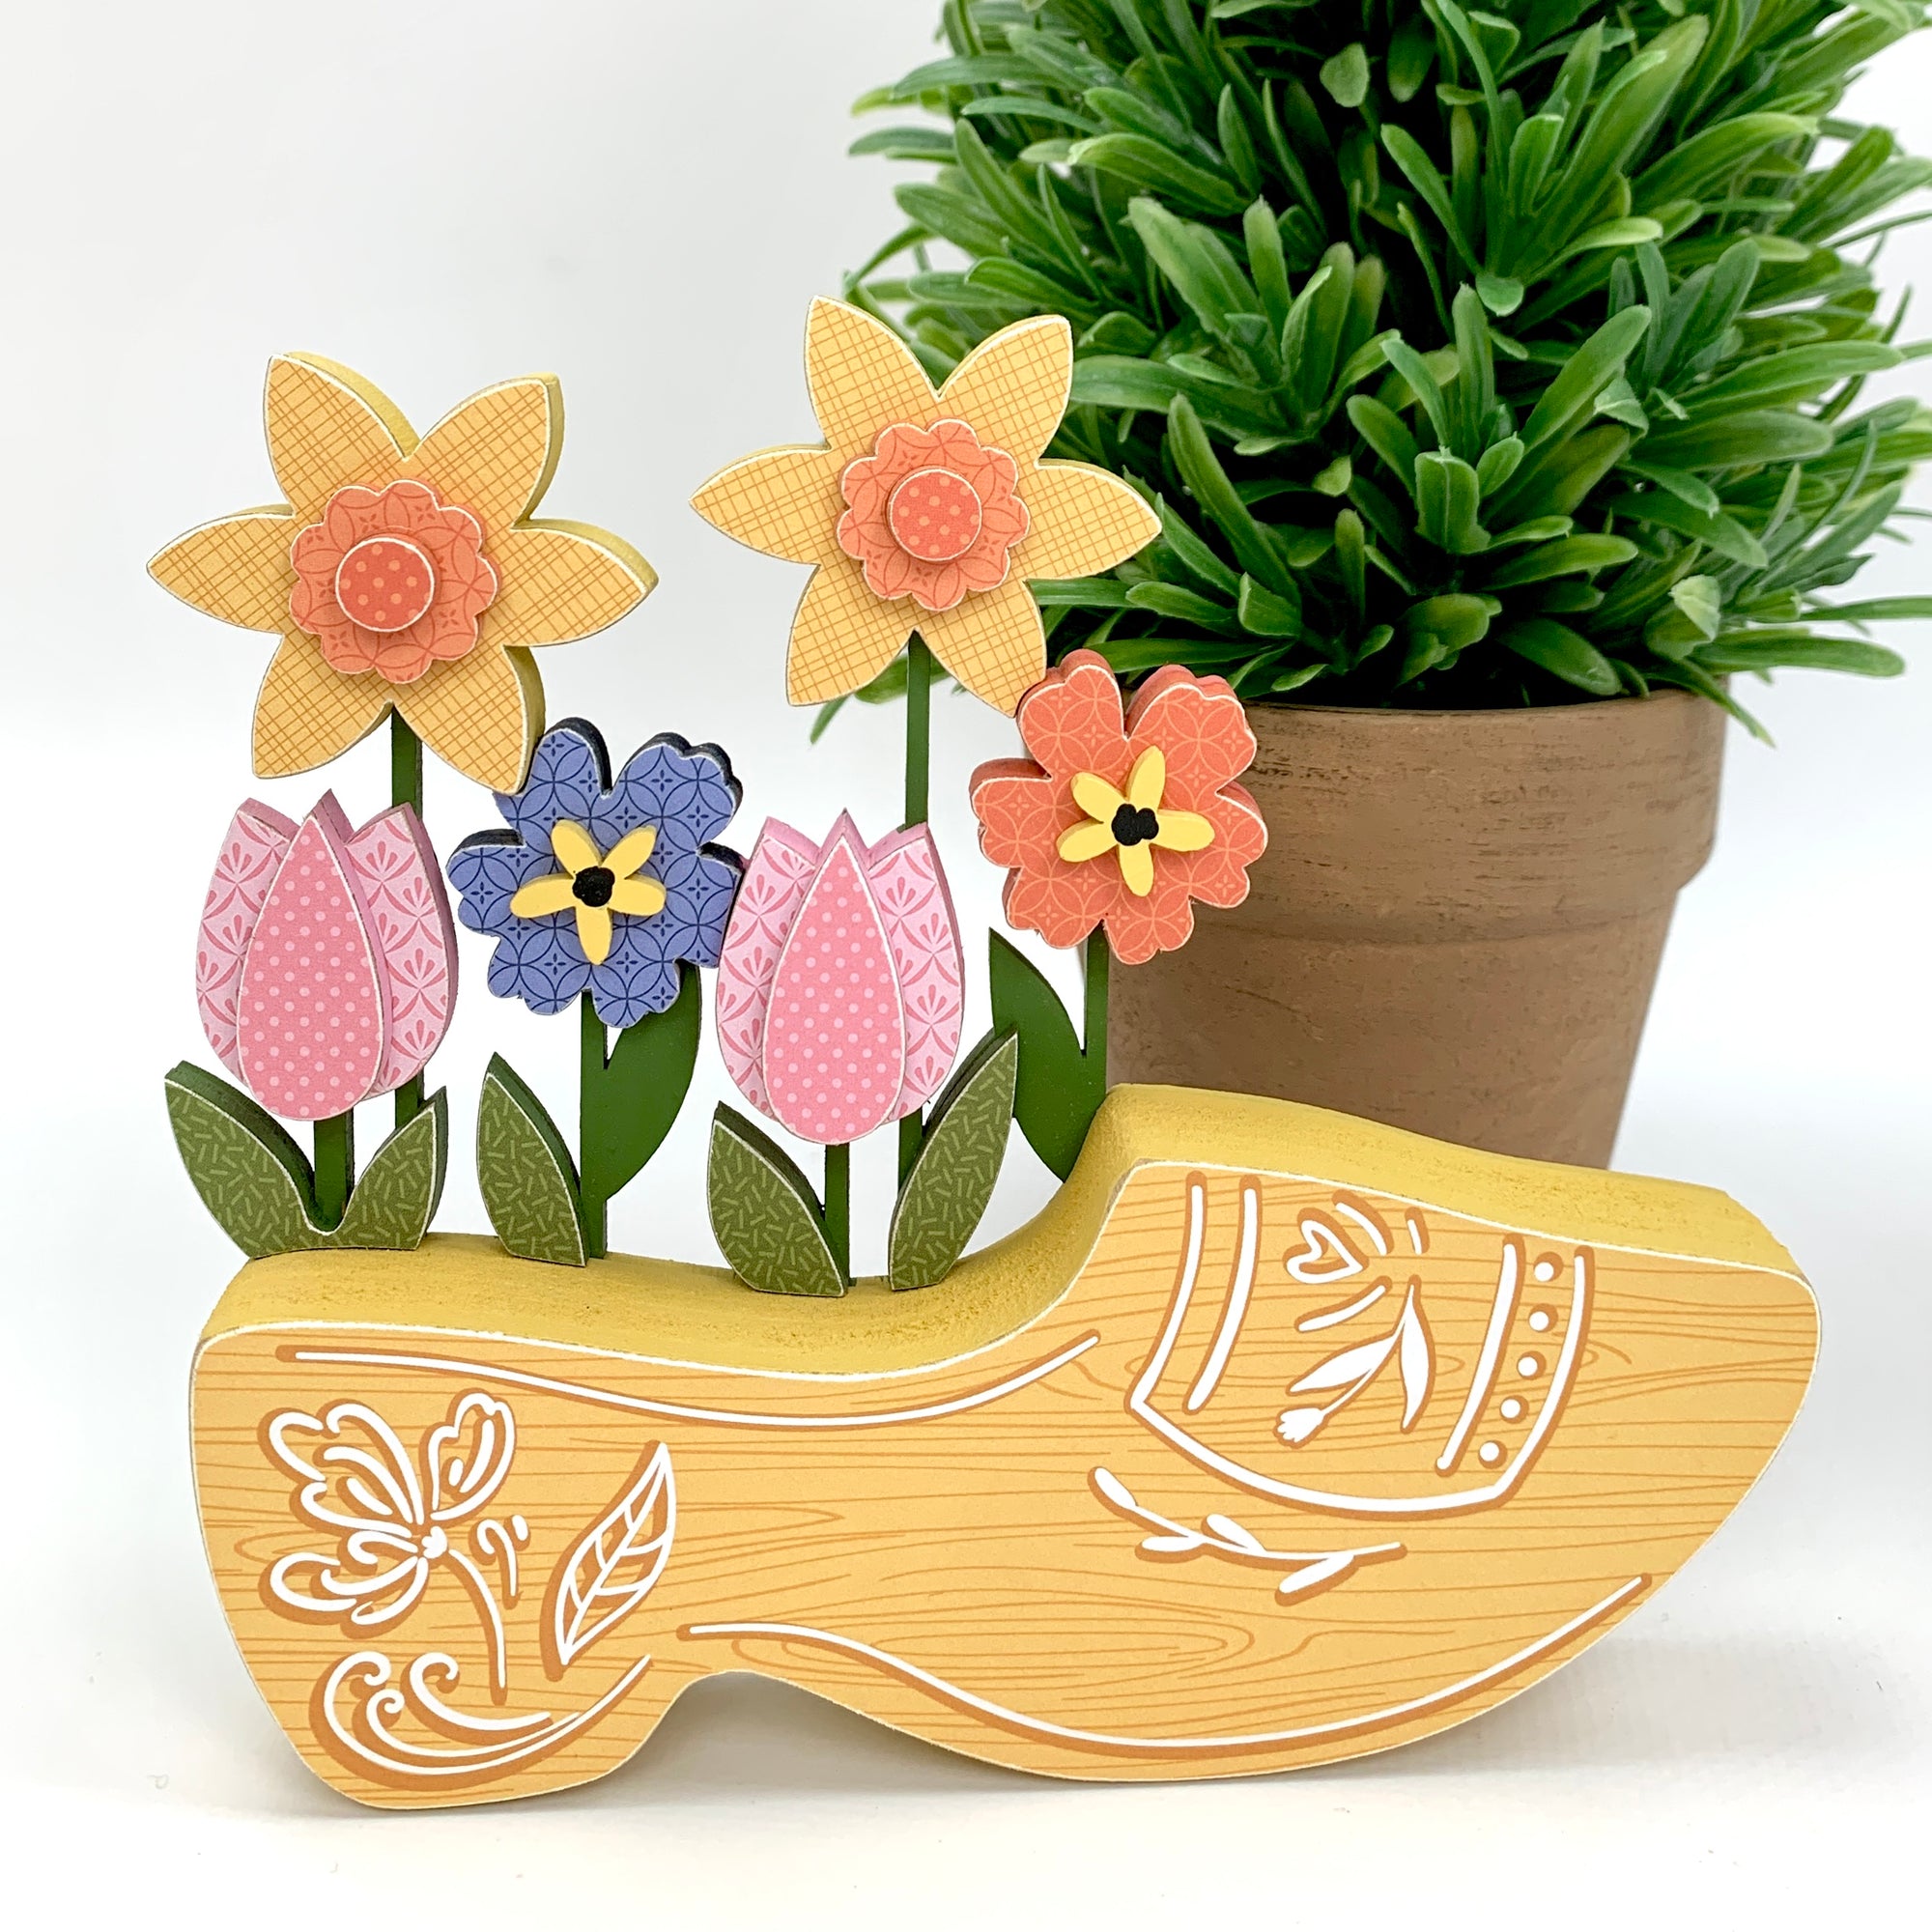 Wood decoration Dutch spring clog with pink tulips, yellow daffodils, and blue flowers